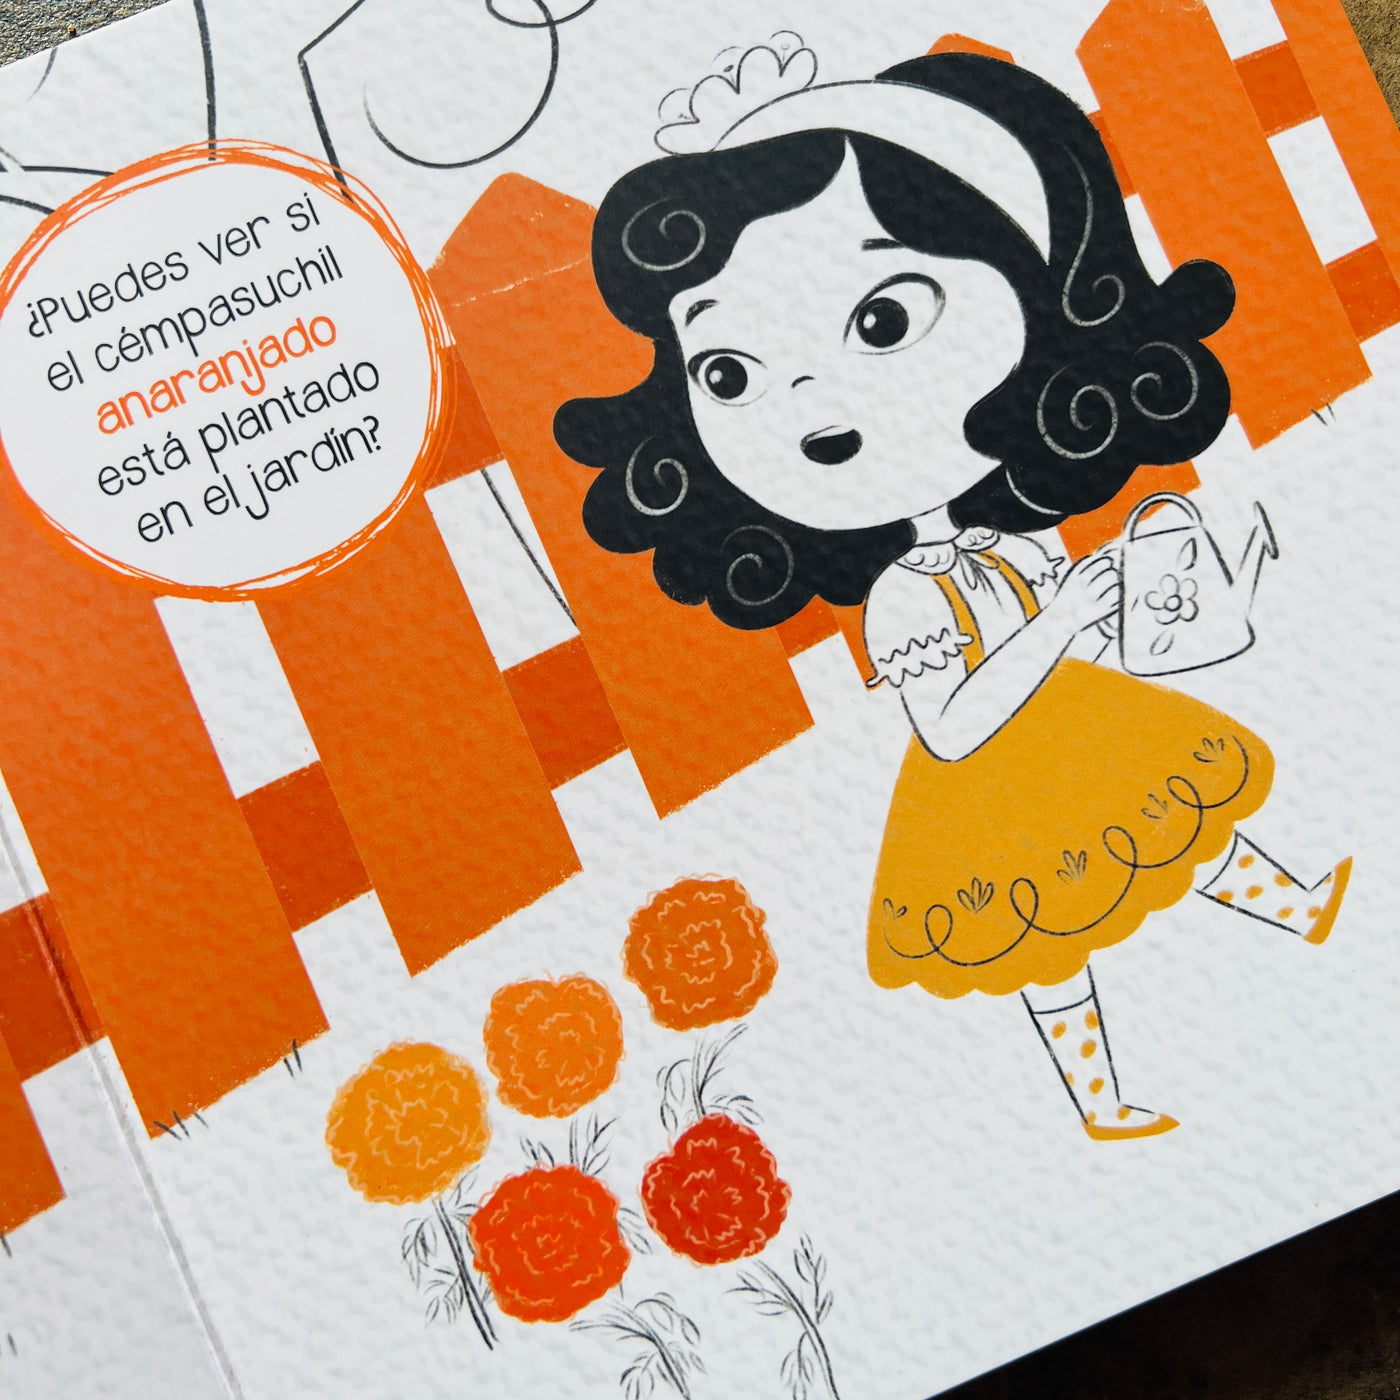 Little girl in an orange dress and fence watering marigolds of various shades of orange as well as a text bubble with the following phrase: Puedes ver si el cempasuchil anaranjado esta plantado en el jardin? Translation: Can you look to see if the orange cempasuchil, or marigold, is planted in the garden?